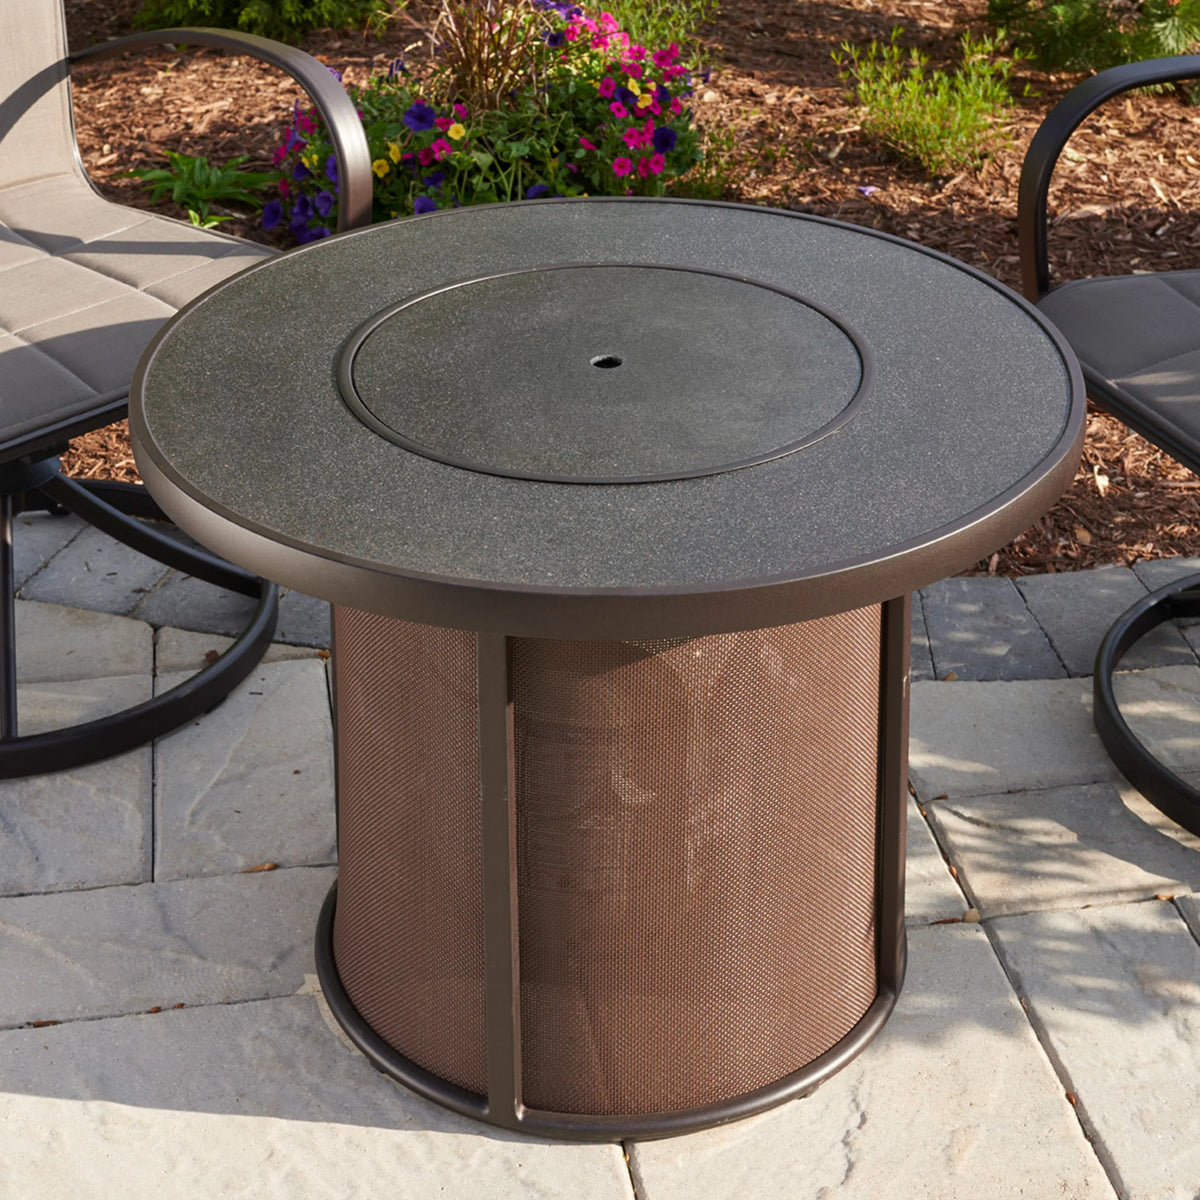 Outdoor GreatRoom Company Brown Stonefire Round Gas Fire Pit Table